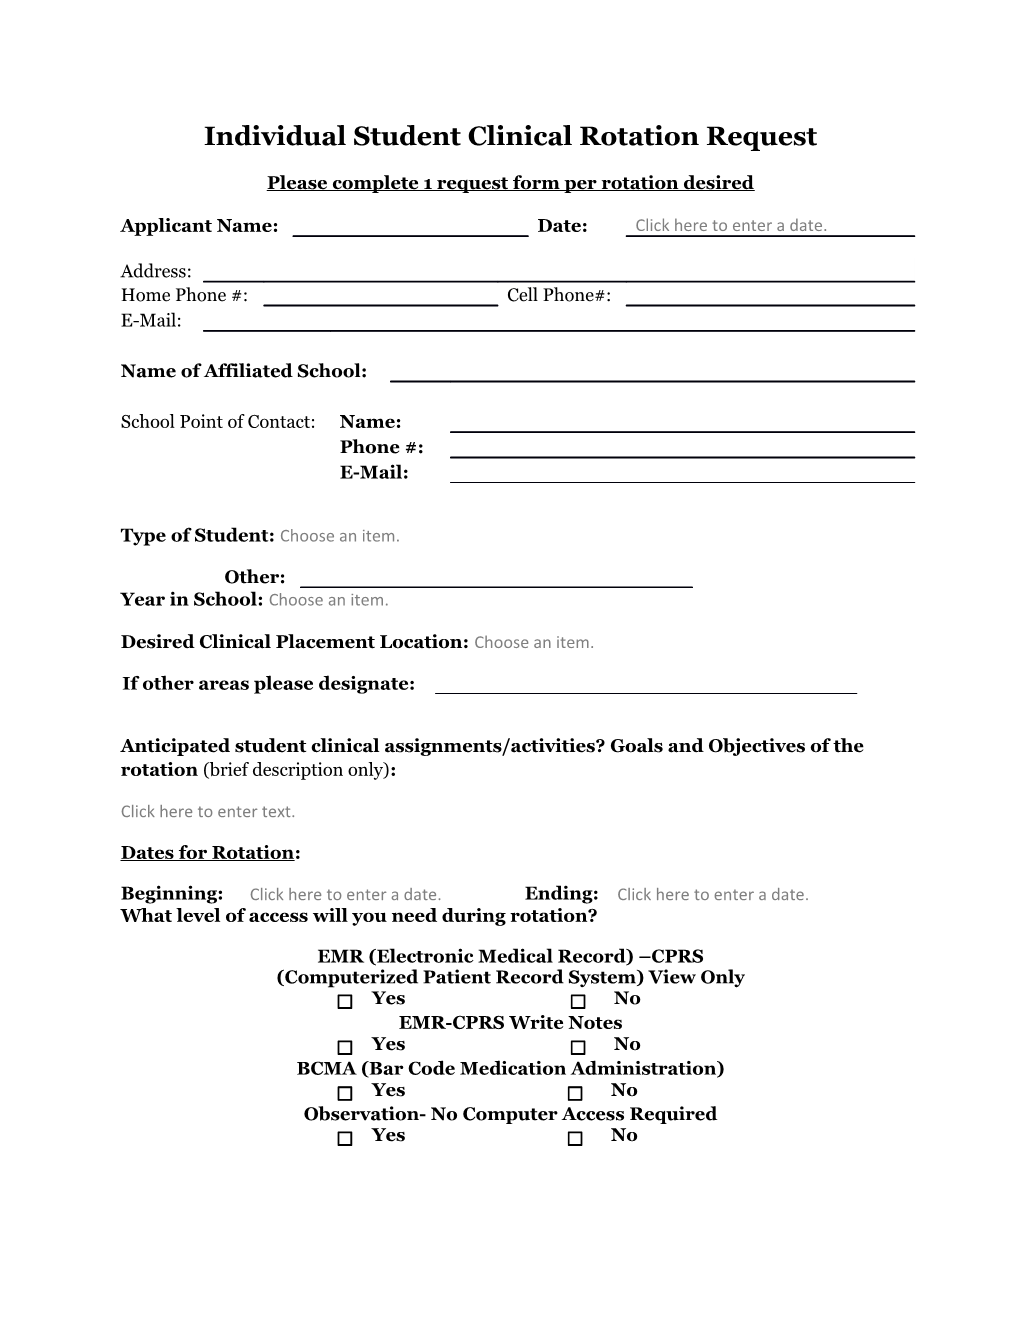 Individual Student Clinical Rotation Request